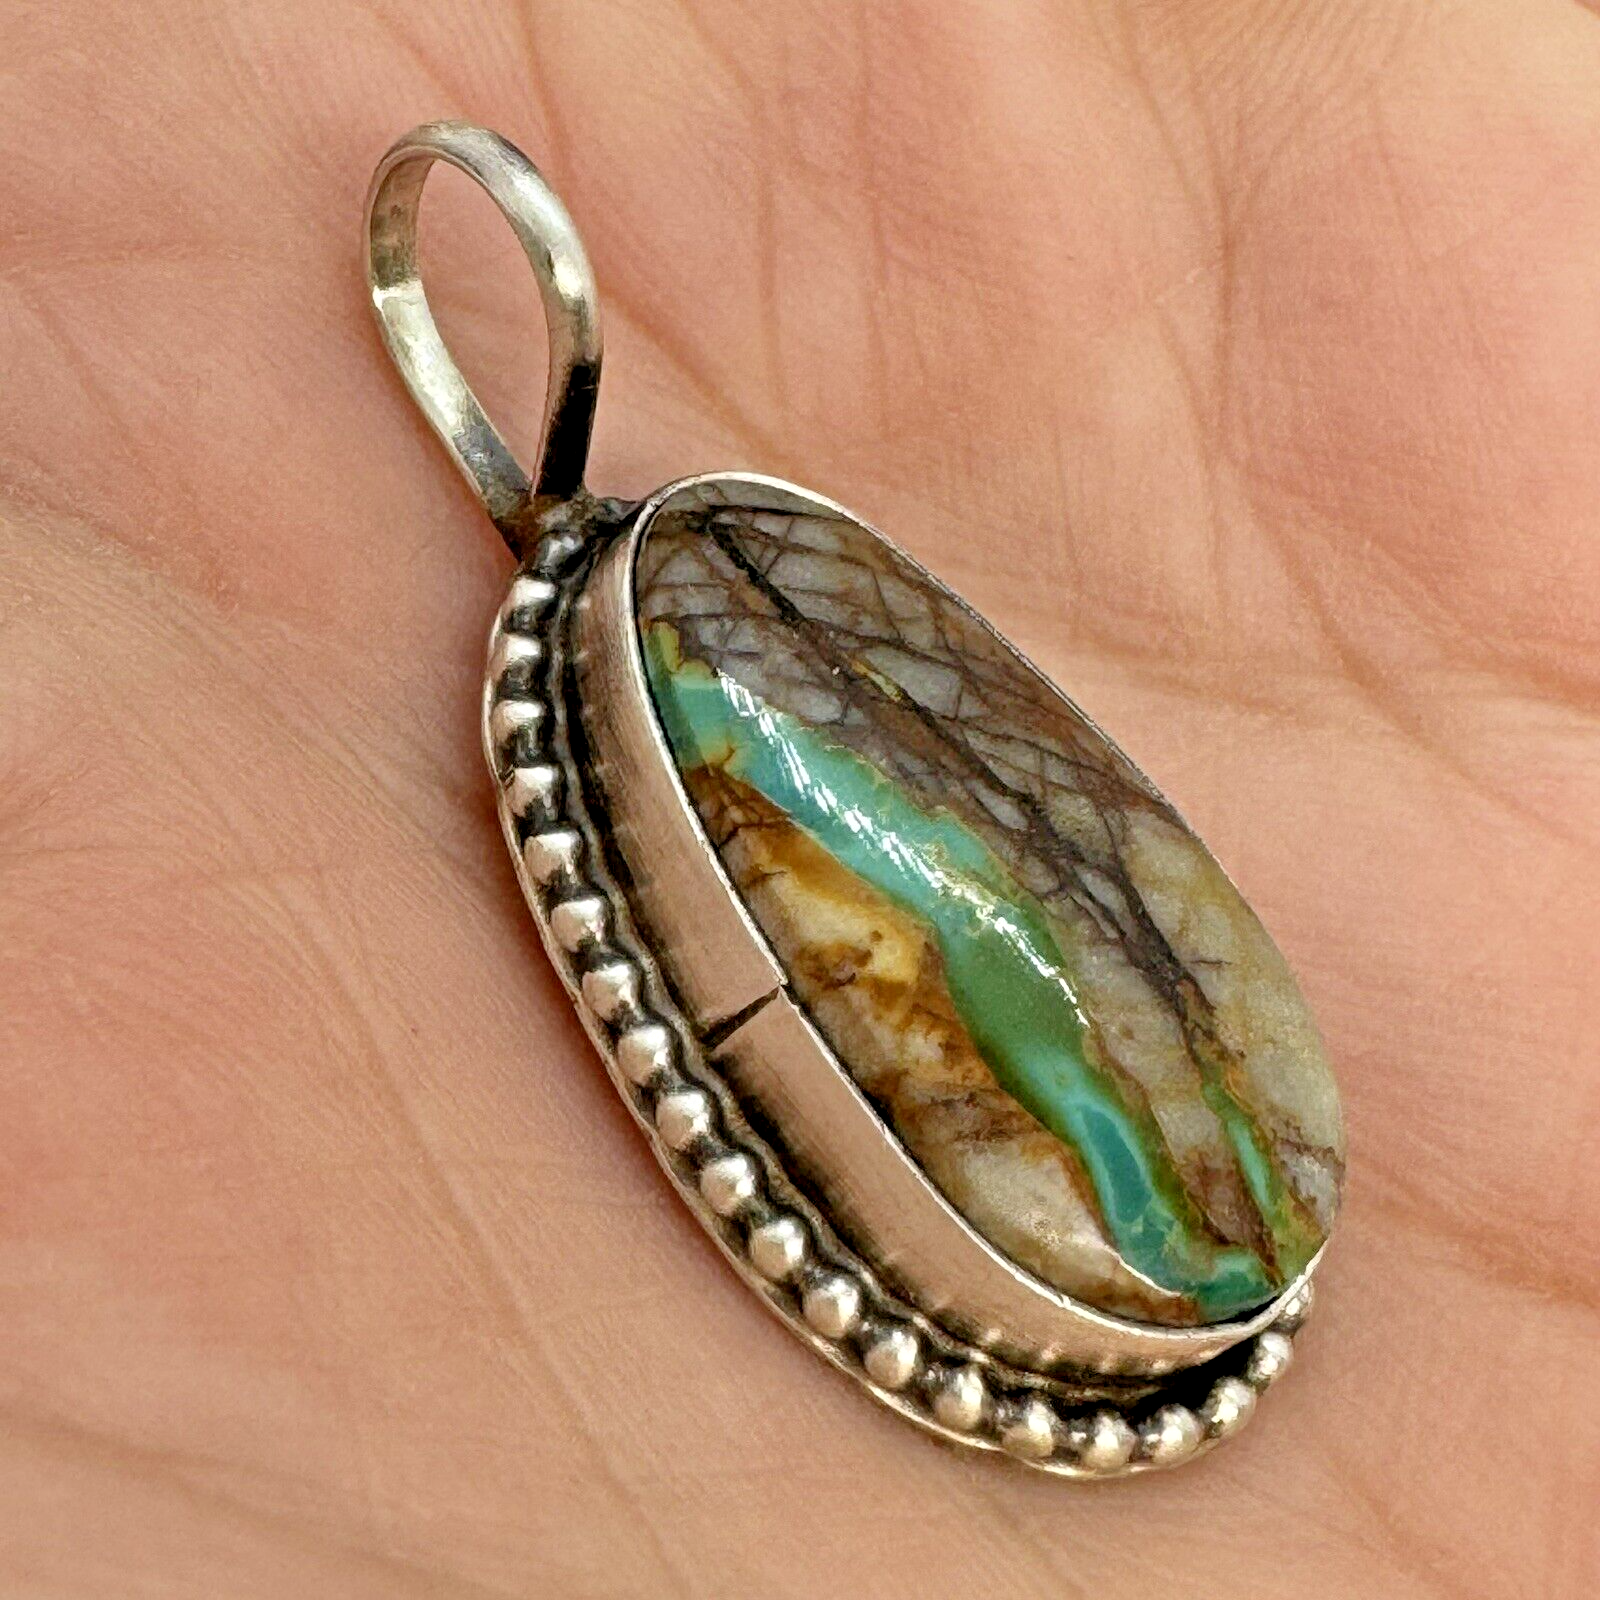 Navajo Natural Ribbon Turquoise Pendant Sterling Silver 7.2g by Anderson Largo Native American - фотография #2